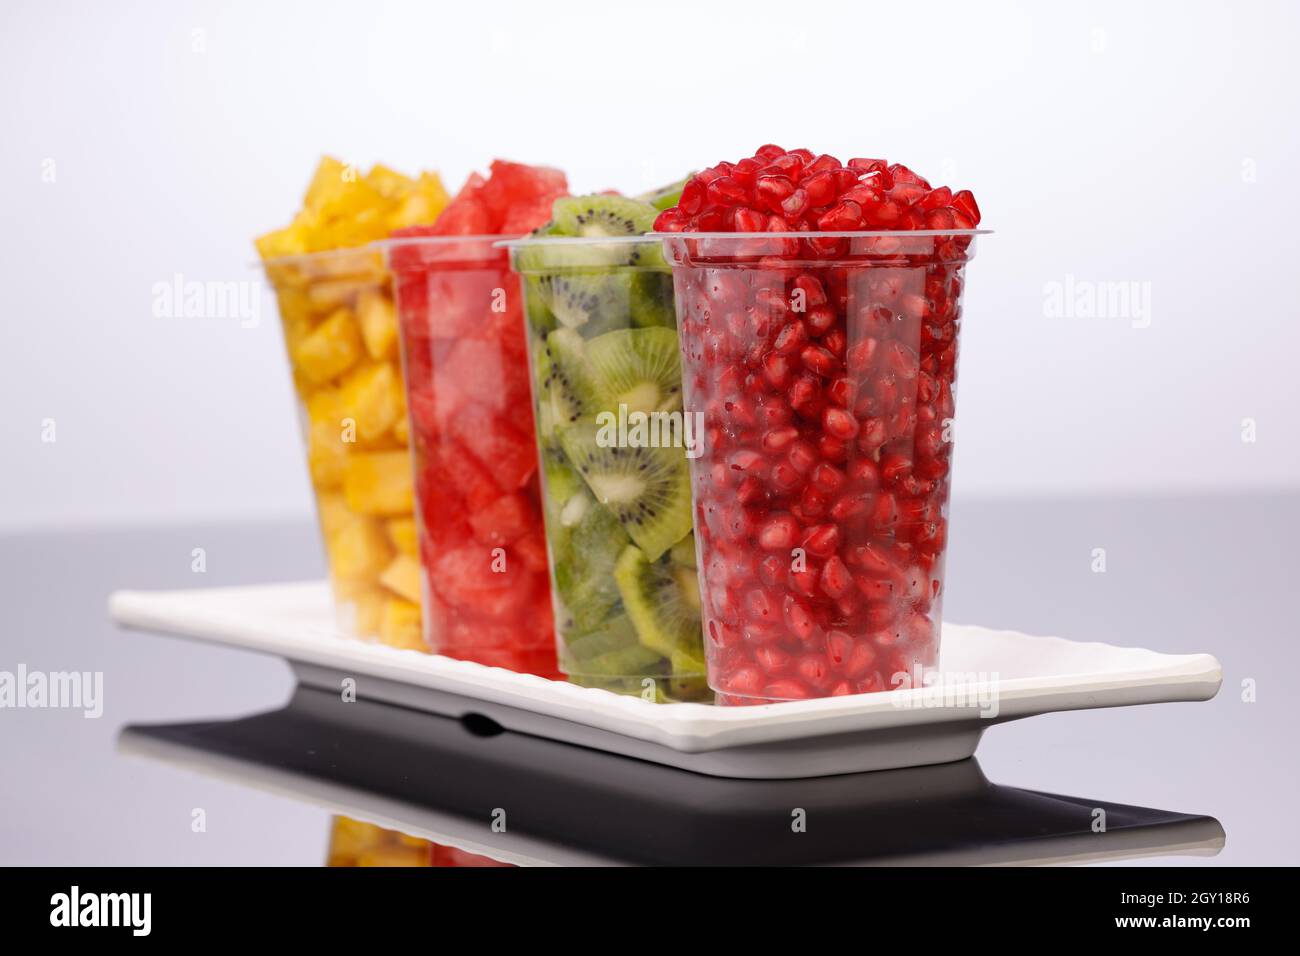 Watermelon , pineapple  , pomegranate and Kiwi  Slices arranged  in  transparent glasses with white background, isolated Stock Photo